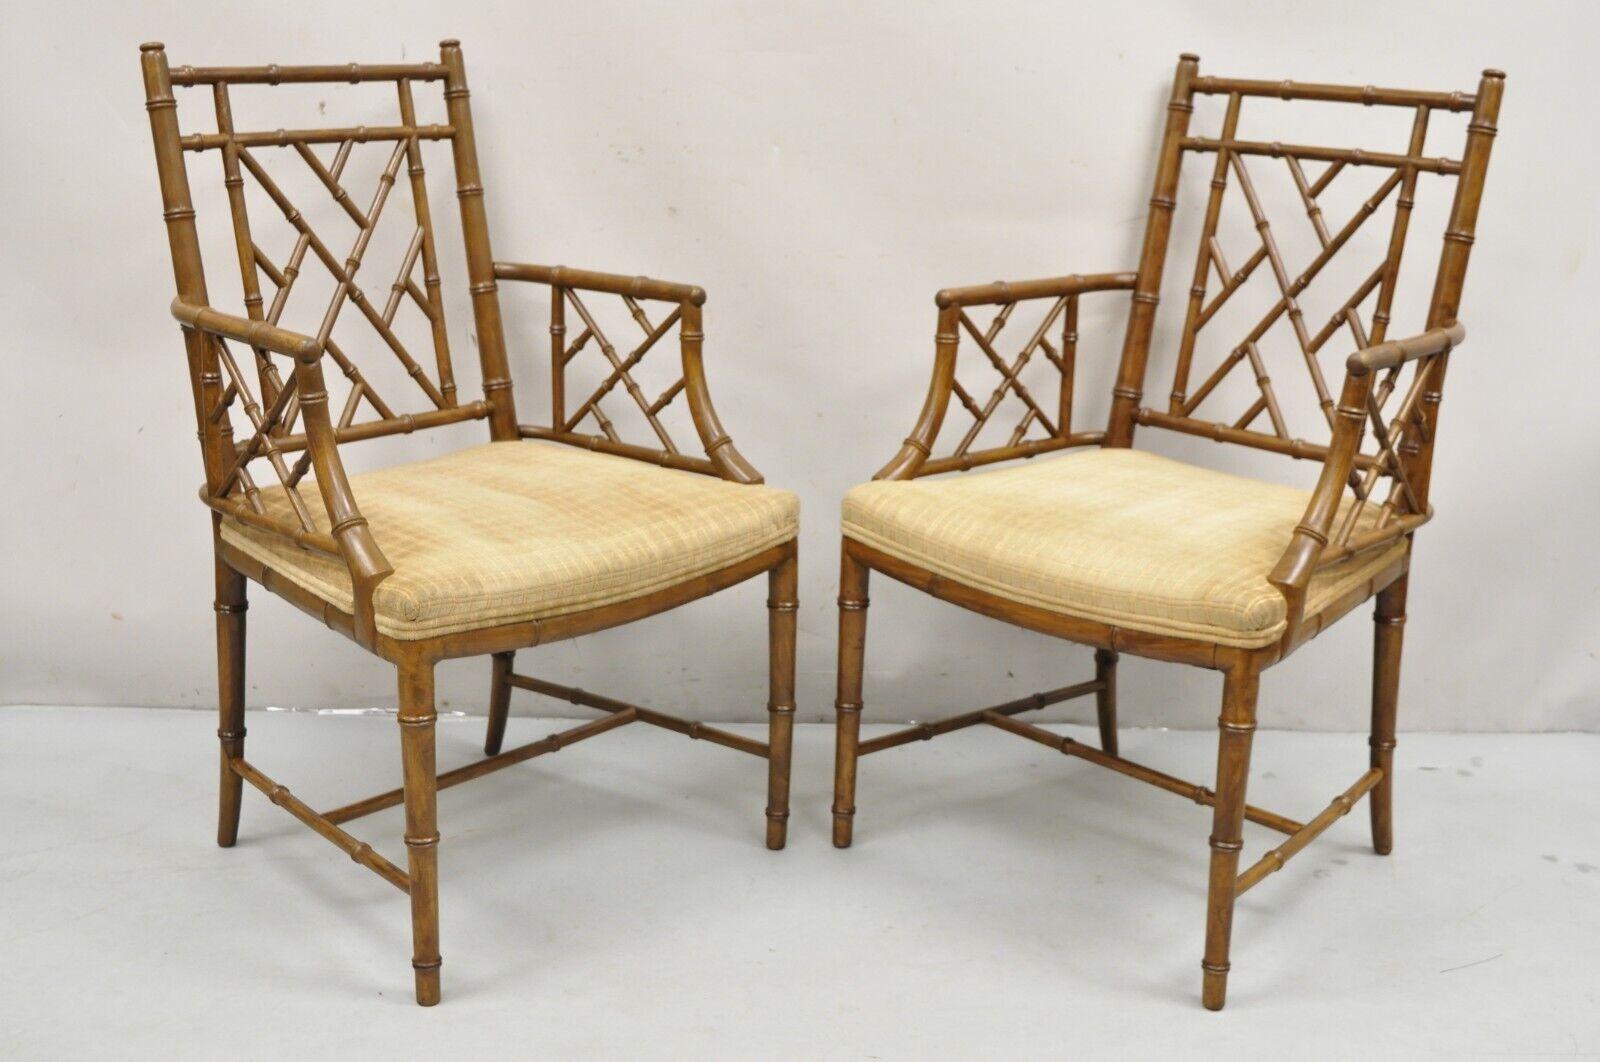 Hollywood Regency Faux Bamboo Fretwork Chinese Chippendale Arm Chairs - Pair For Sale 4